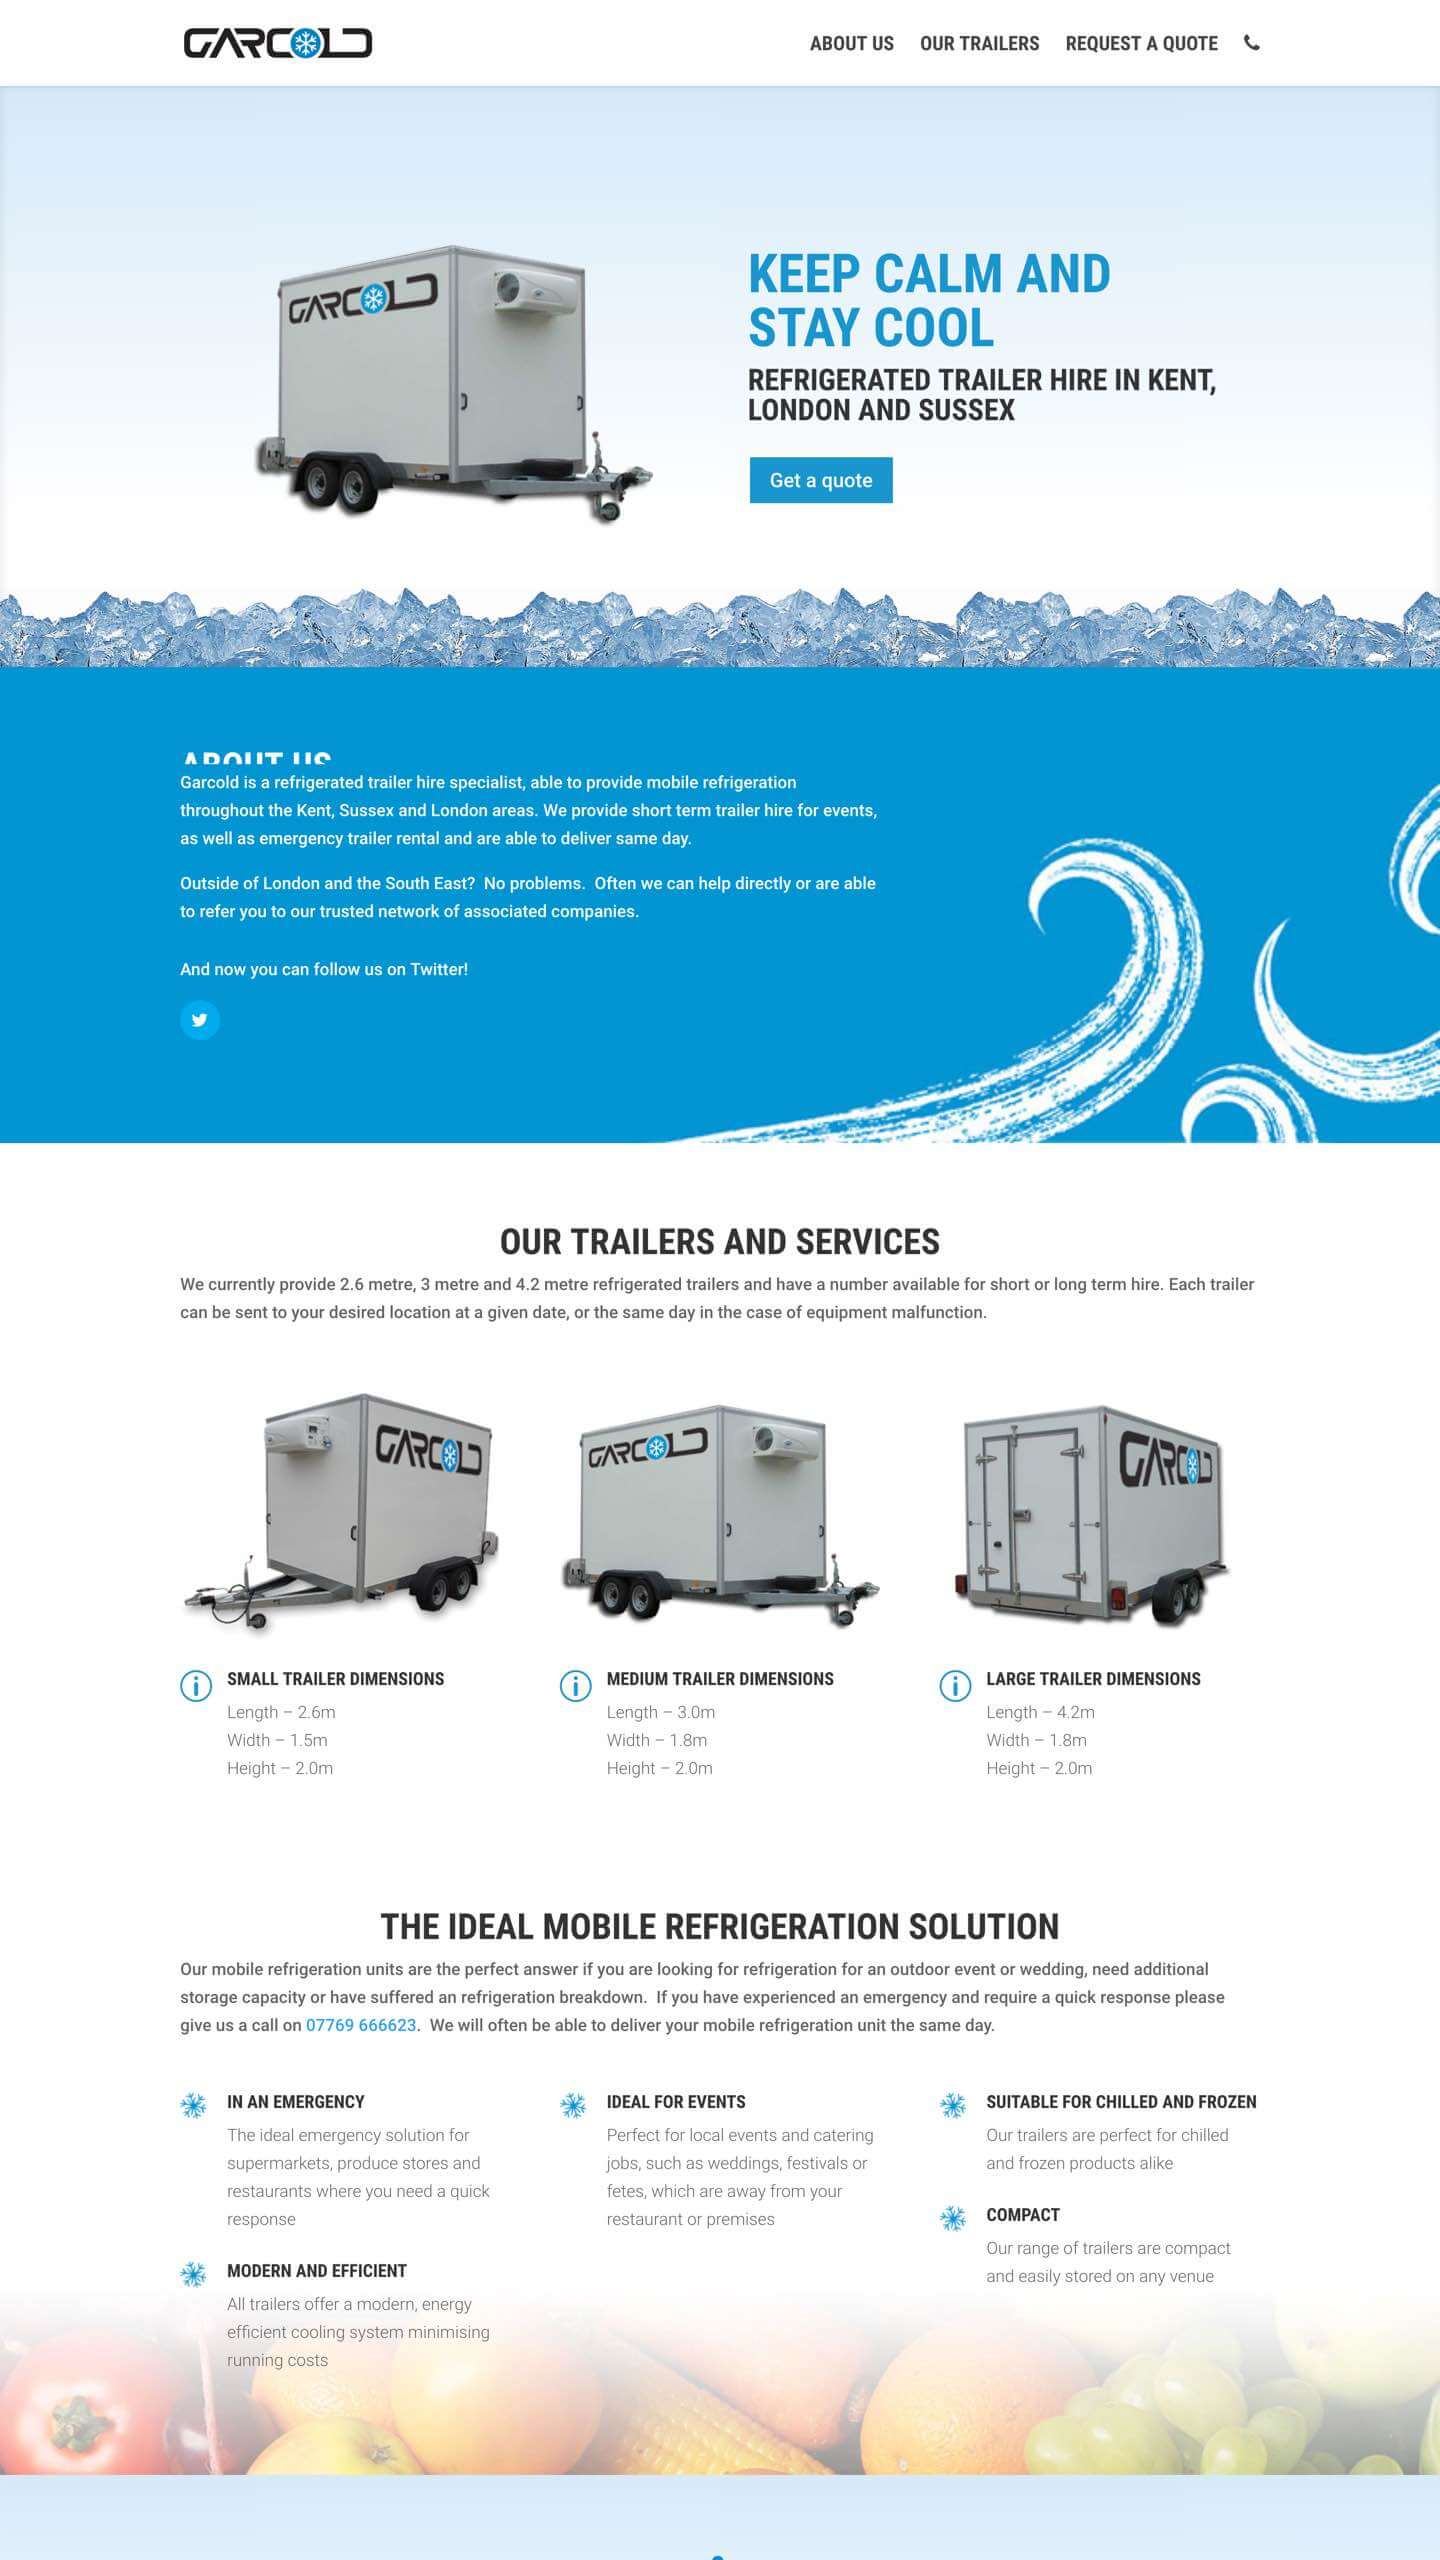 Garcold Refrigeration - built by digiphore